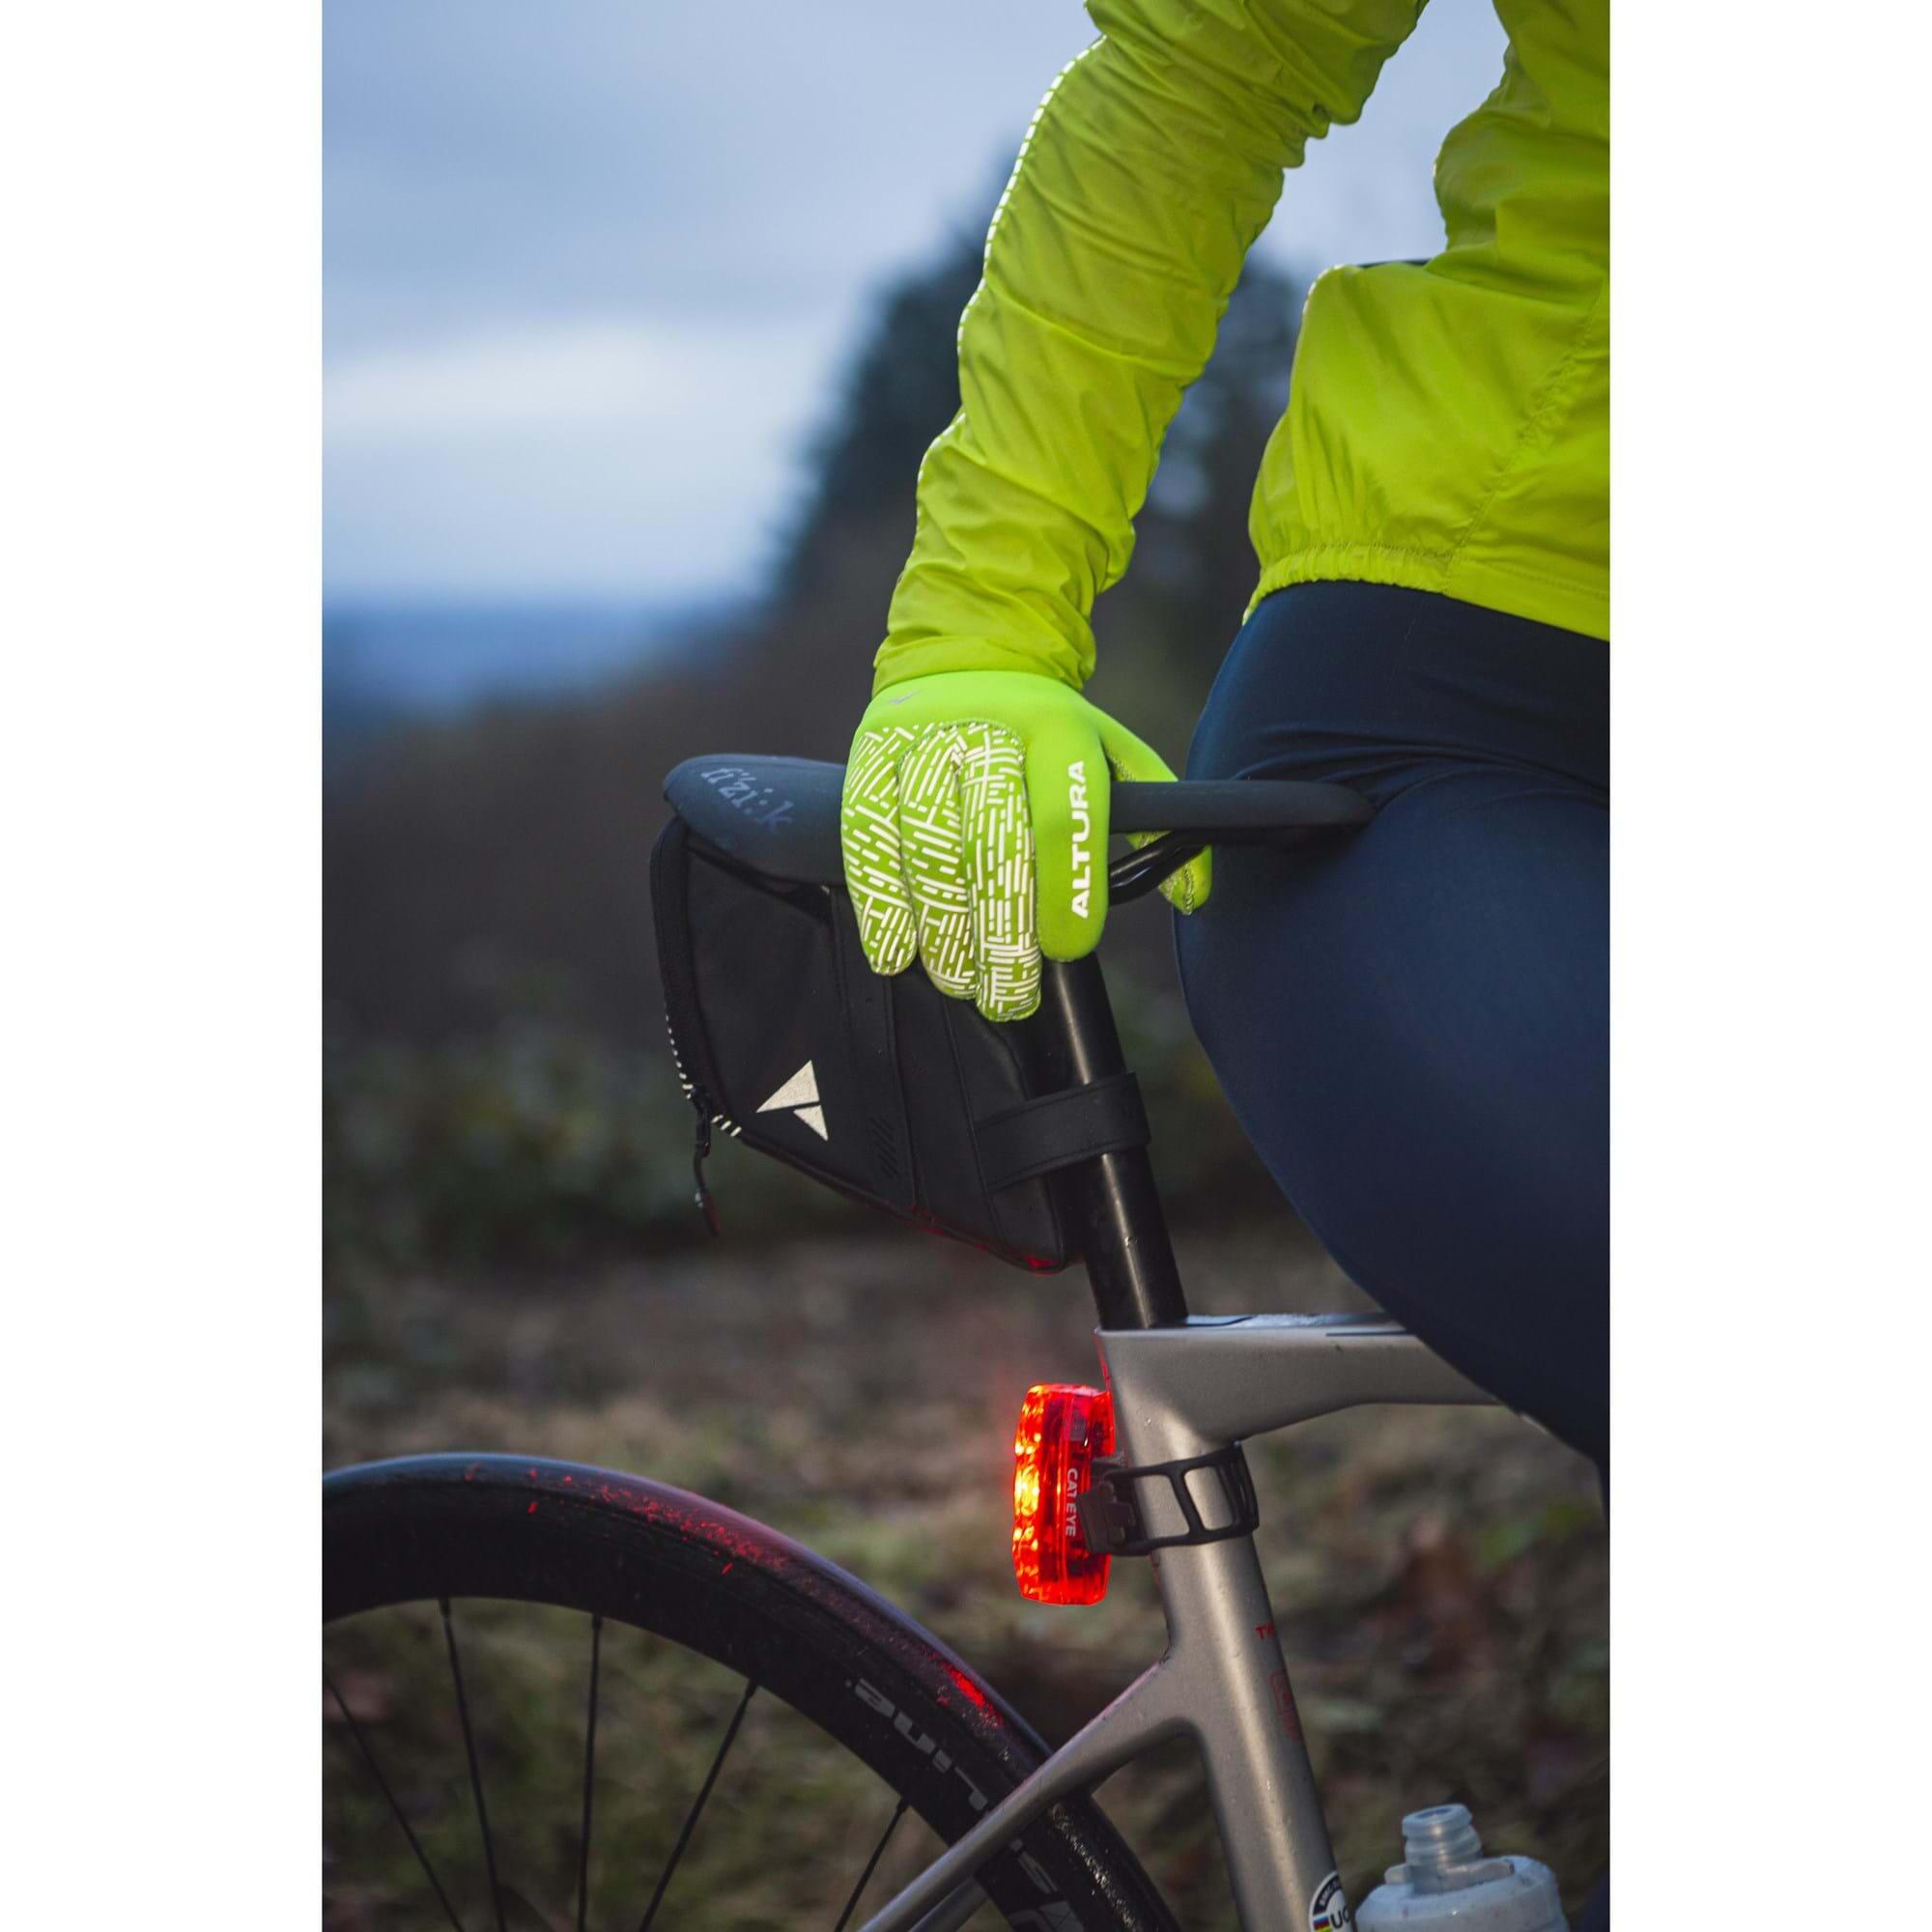 Nightvision Unisex Windproof Fleece Cycling Gloves 4/5